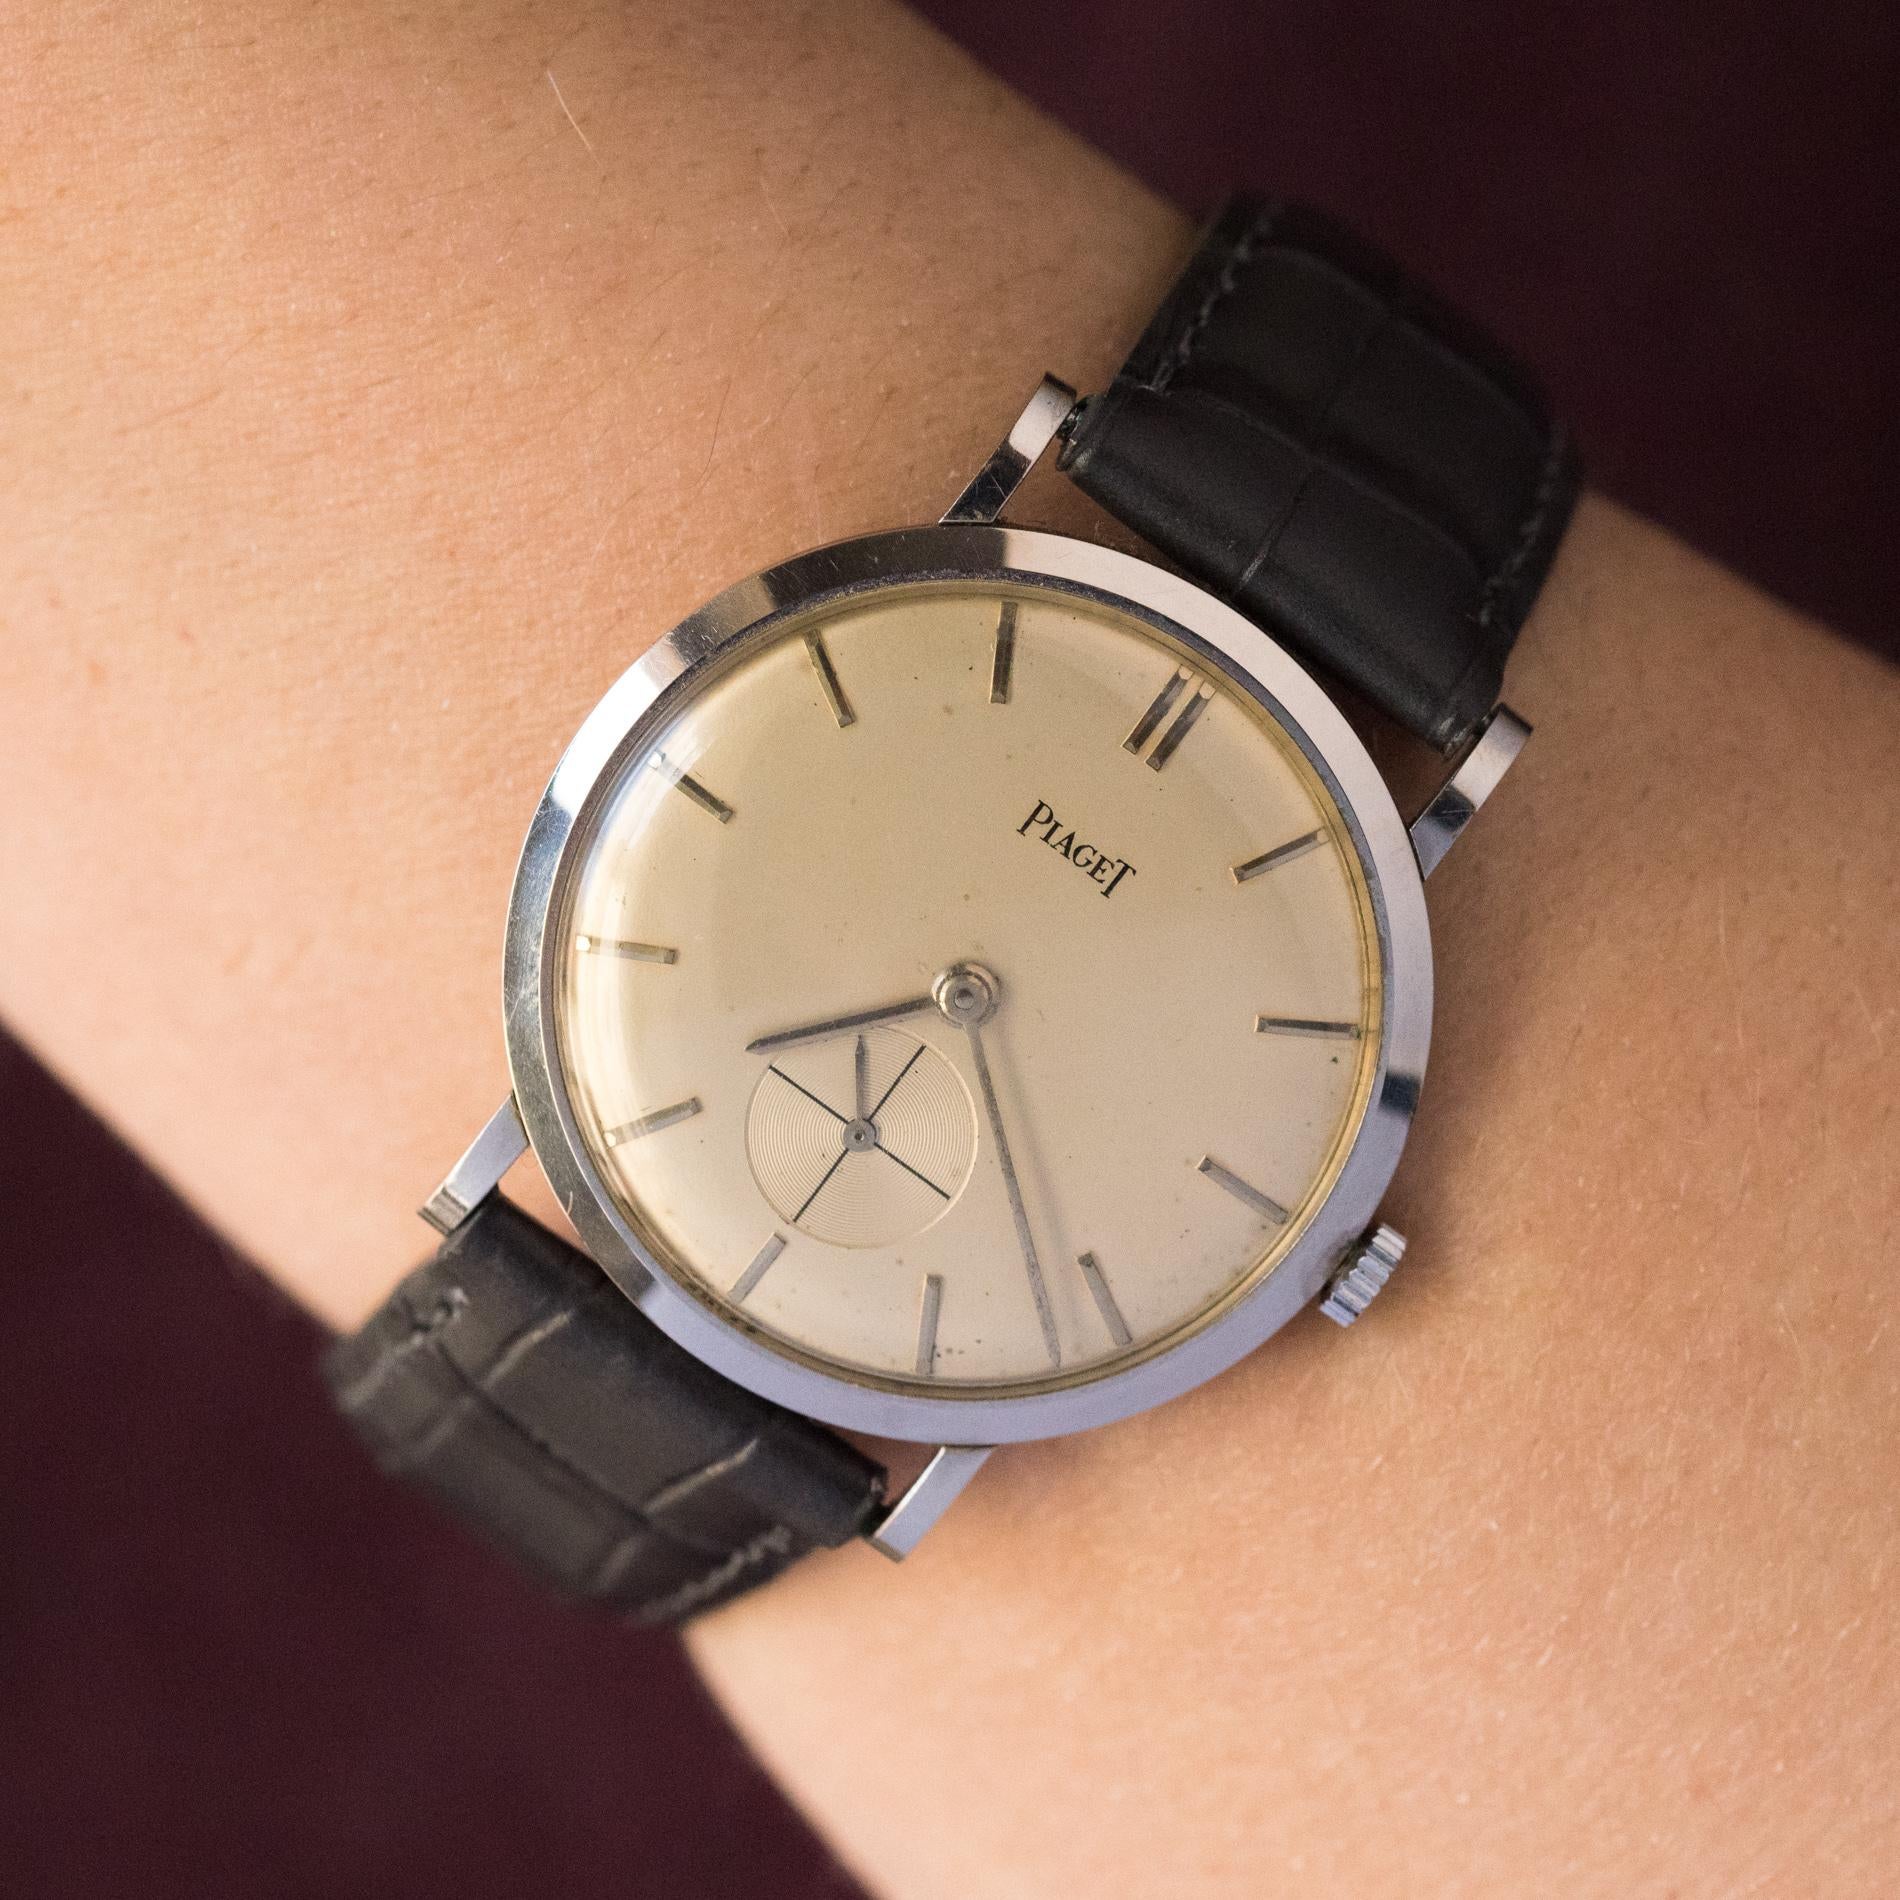 Piaget men's watch in silver metal.
Round case in silver metal, light beige background.
Small second.
Mechanical watch with manual winding.
New bracelet in gray Italian calf leather - silver metal buckle.
Retro Watch - Work of the 1960s.
Signed